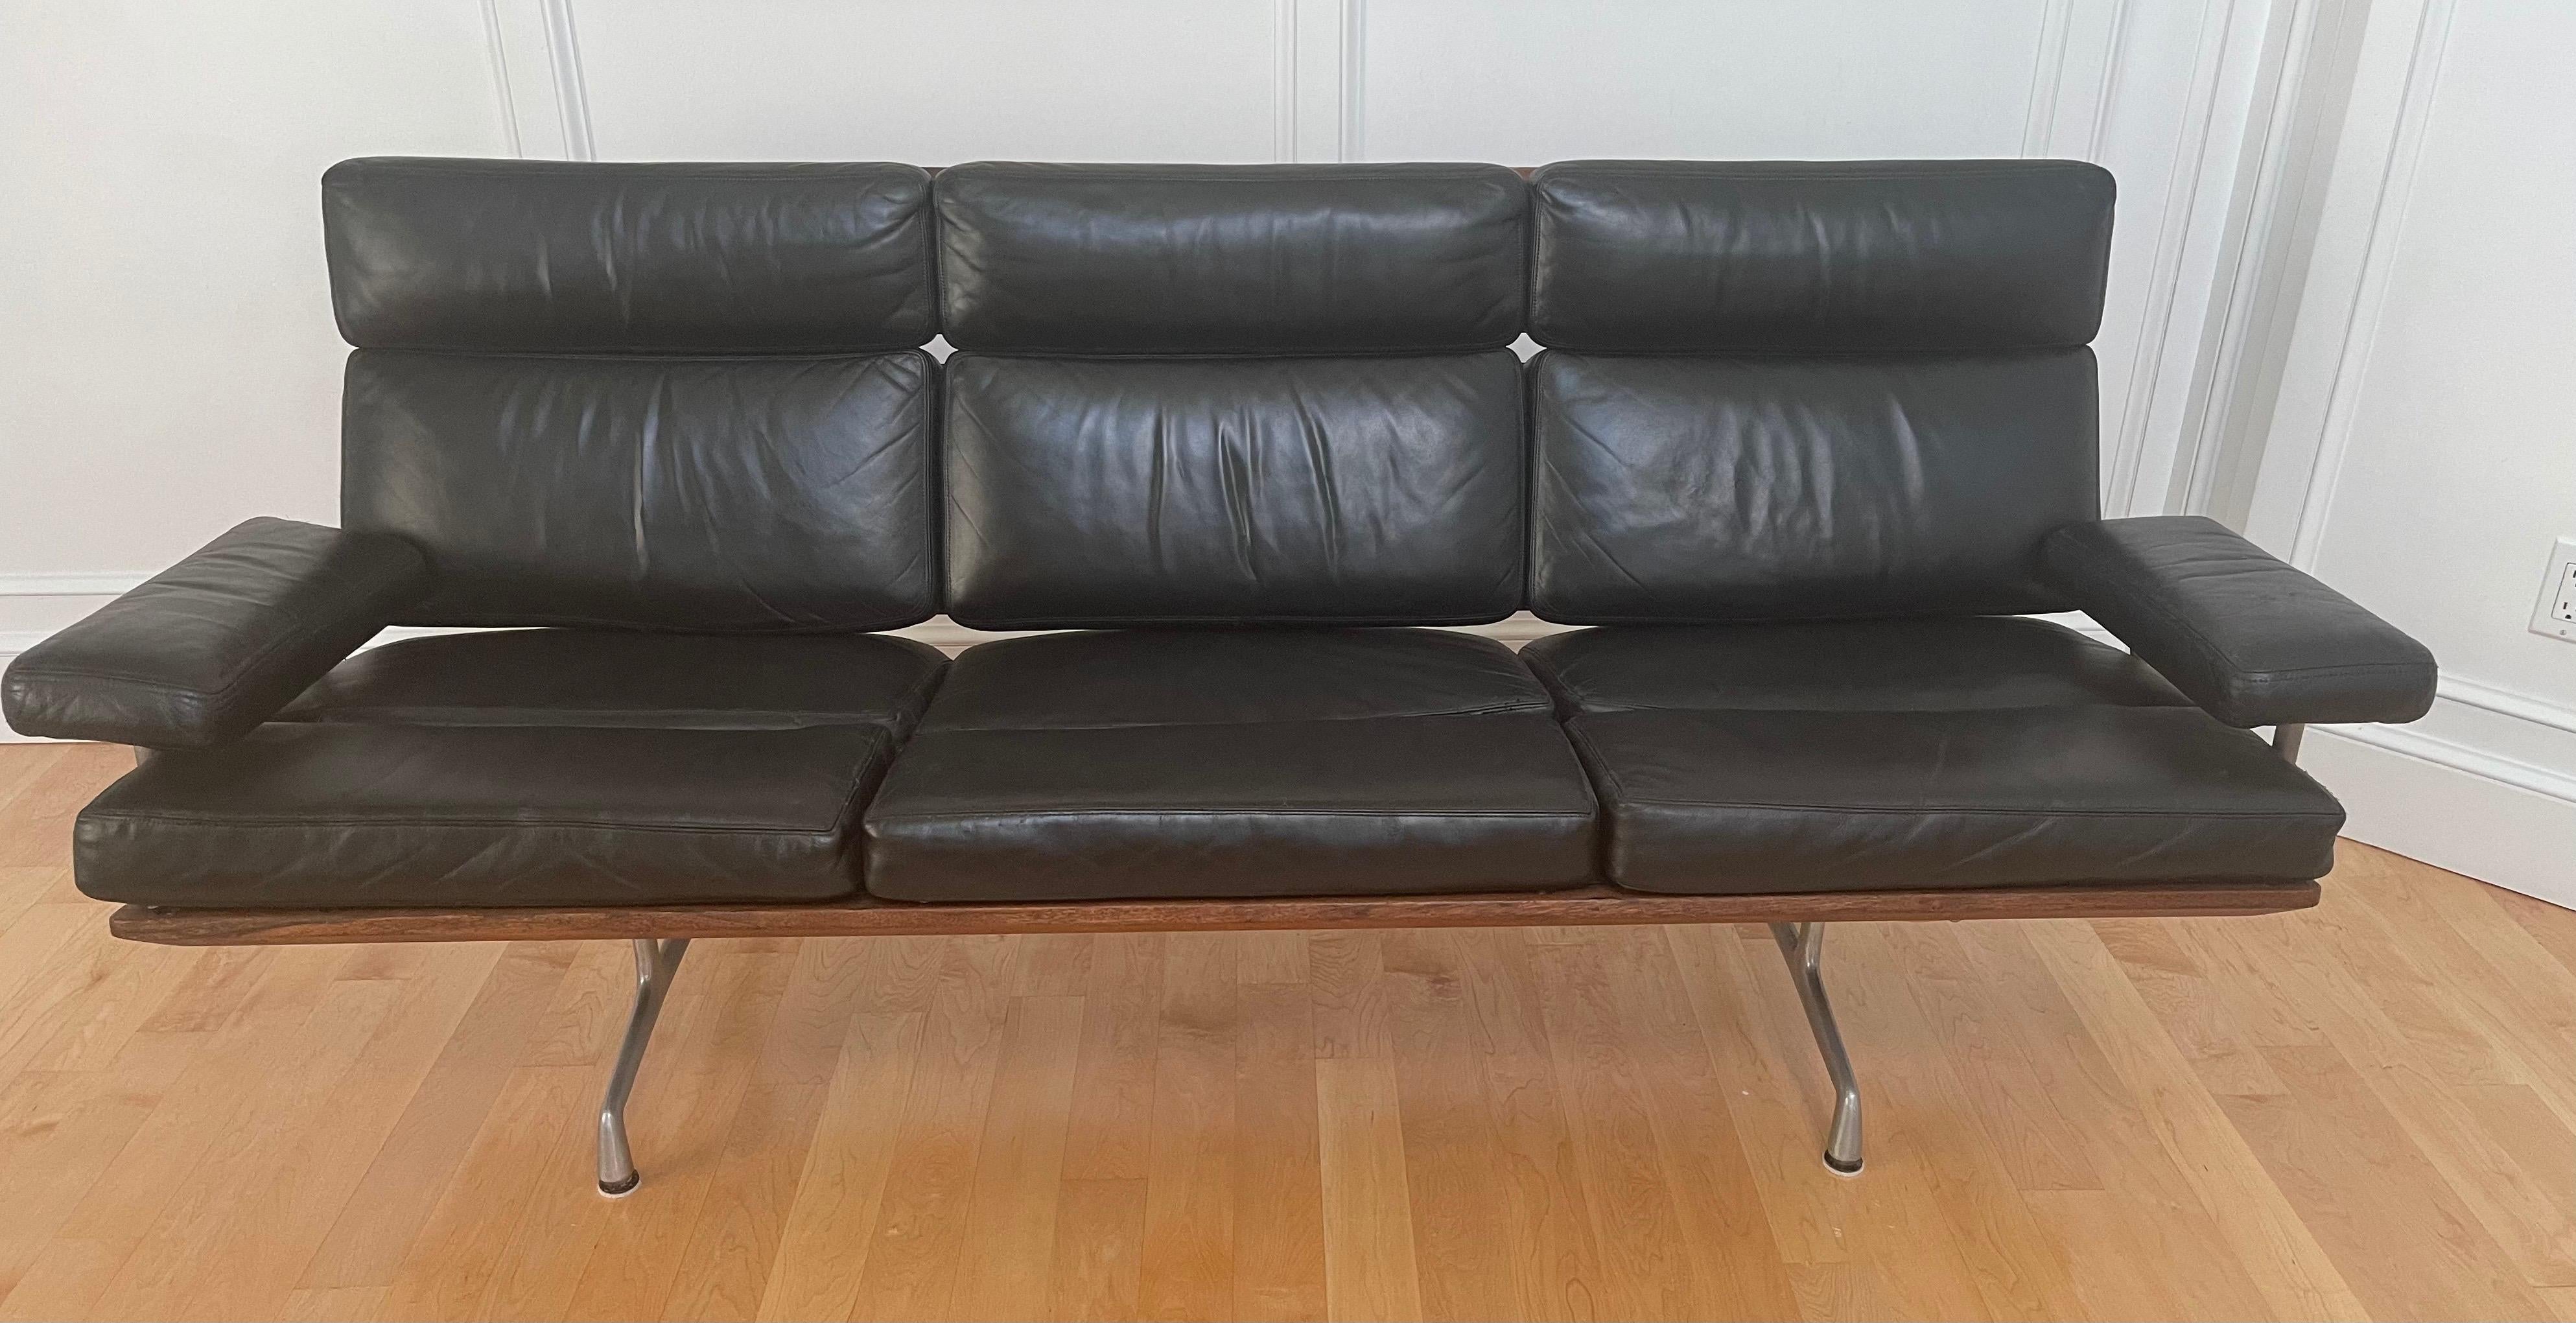 Authentic black leather and walnut three seat sofa by Charles & Ray Eames for Herman Miller, circa mid 1980s (very early production piece). The sofa is in excellent vintage condition and features solid wood back and frame panels finished with